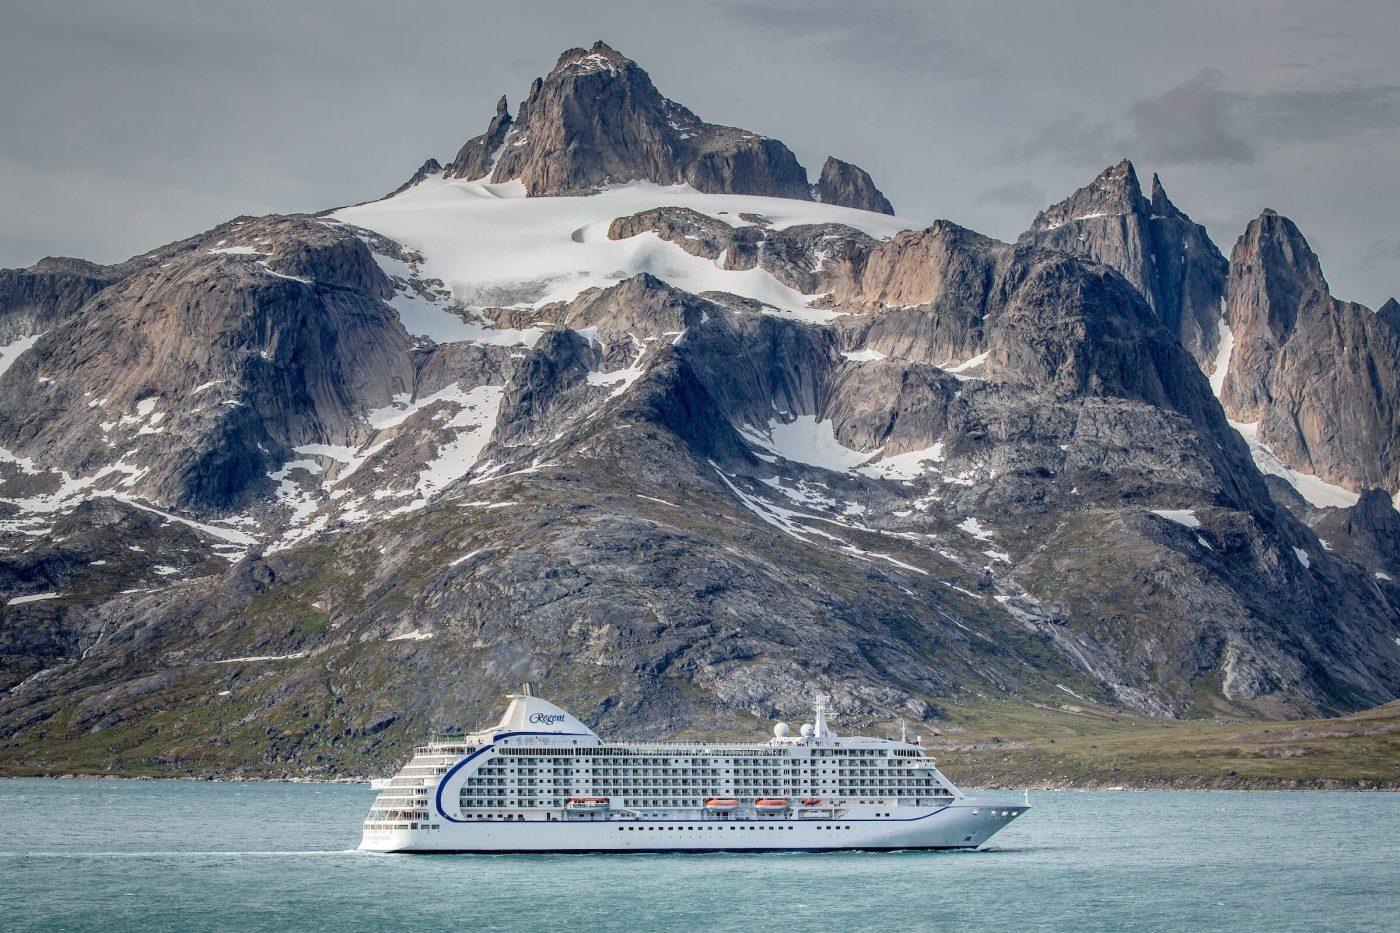 The cruise ship Sevens Seas Voyager passes underneath the mountain Qilertiki in South Greenland near Aappilattoq and Prince Christian Sound. Photo by Sevens Seas Voyager